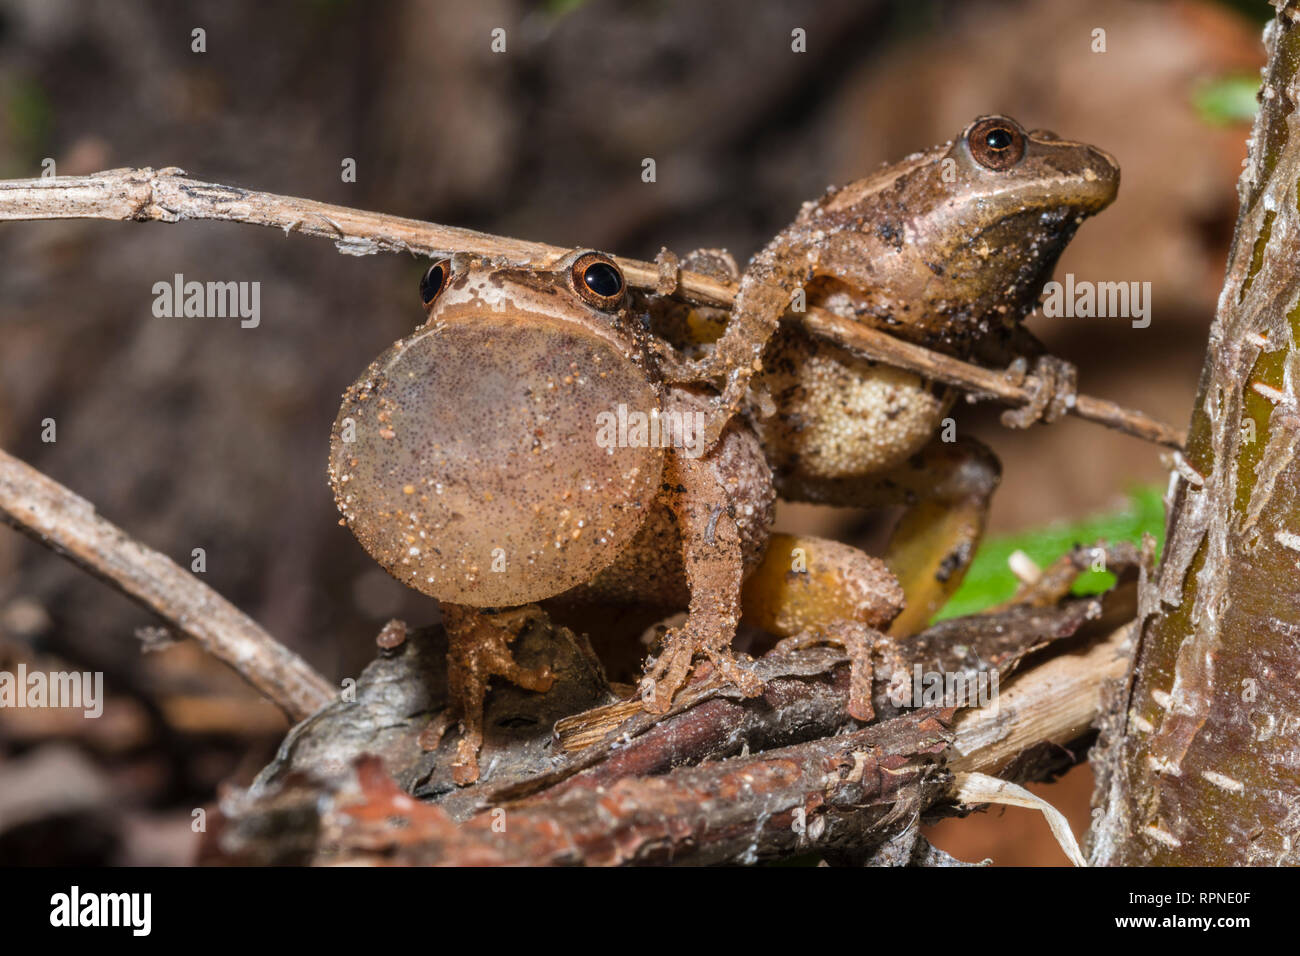 Zoologie/Tiere, Amphibien (Amphibia), Spring Peepers (Pseudacris Kreuzblütler) mit Vocal sac aufgeblasen, Additional-Rights - Clearance-Info - Not-Available Stockfoto